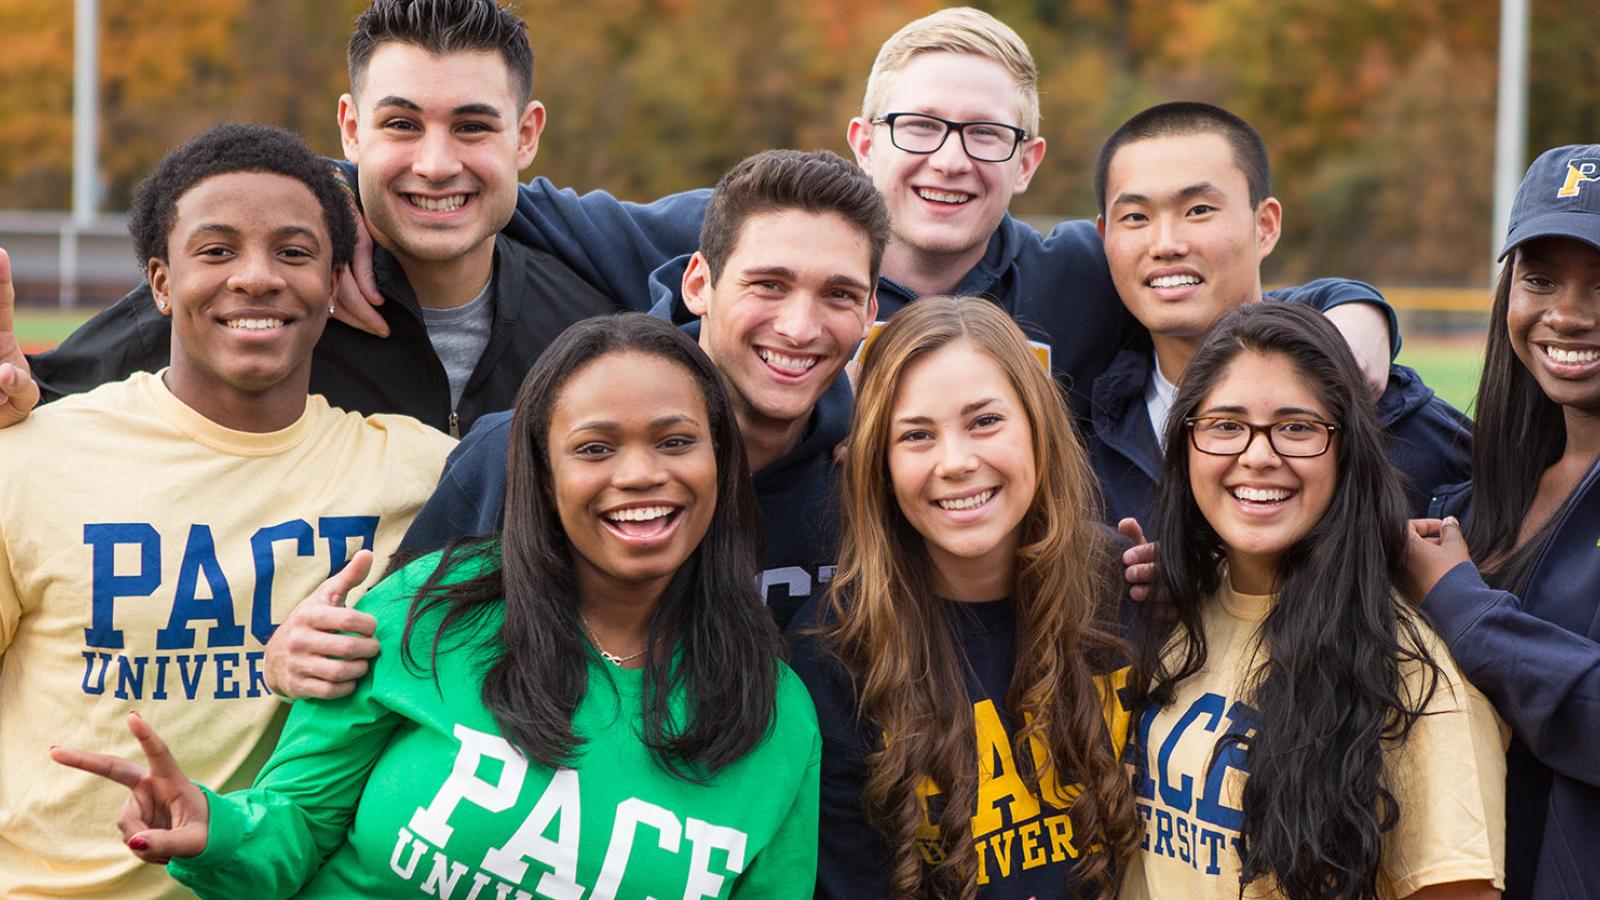 Pace students on the Pleasantville Campus